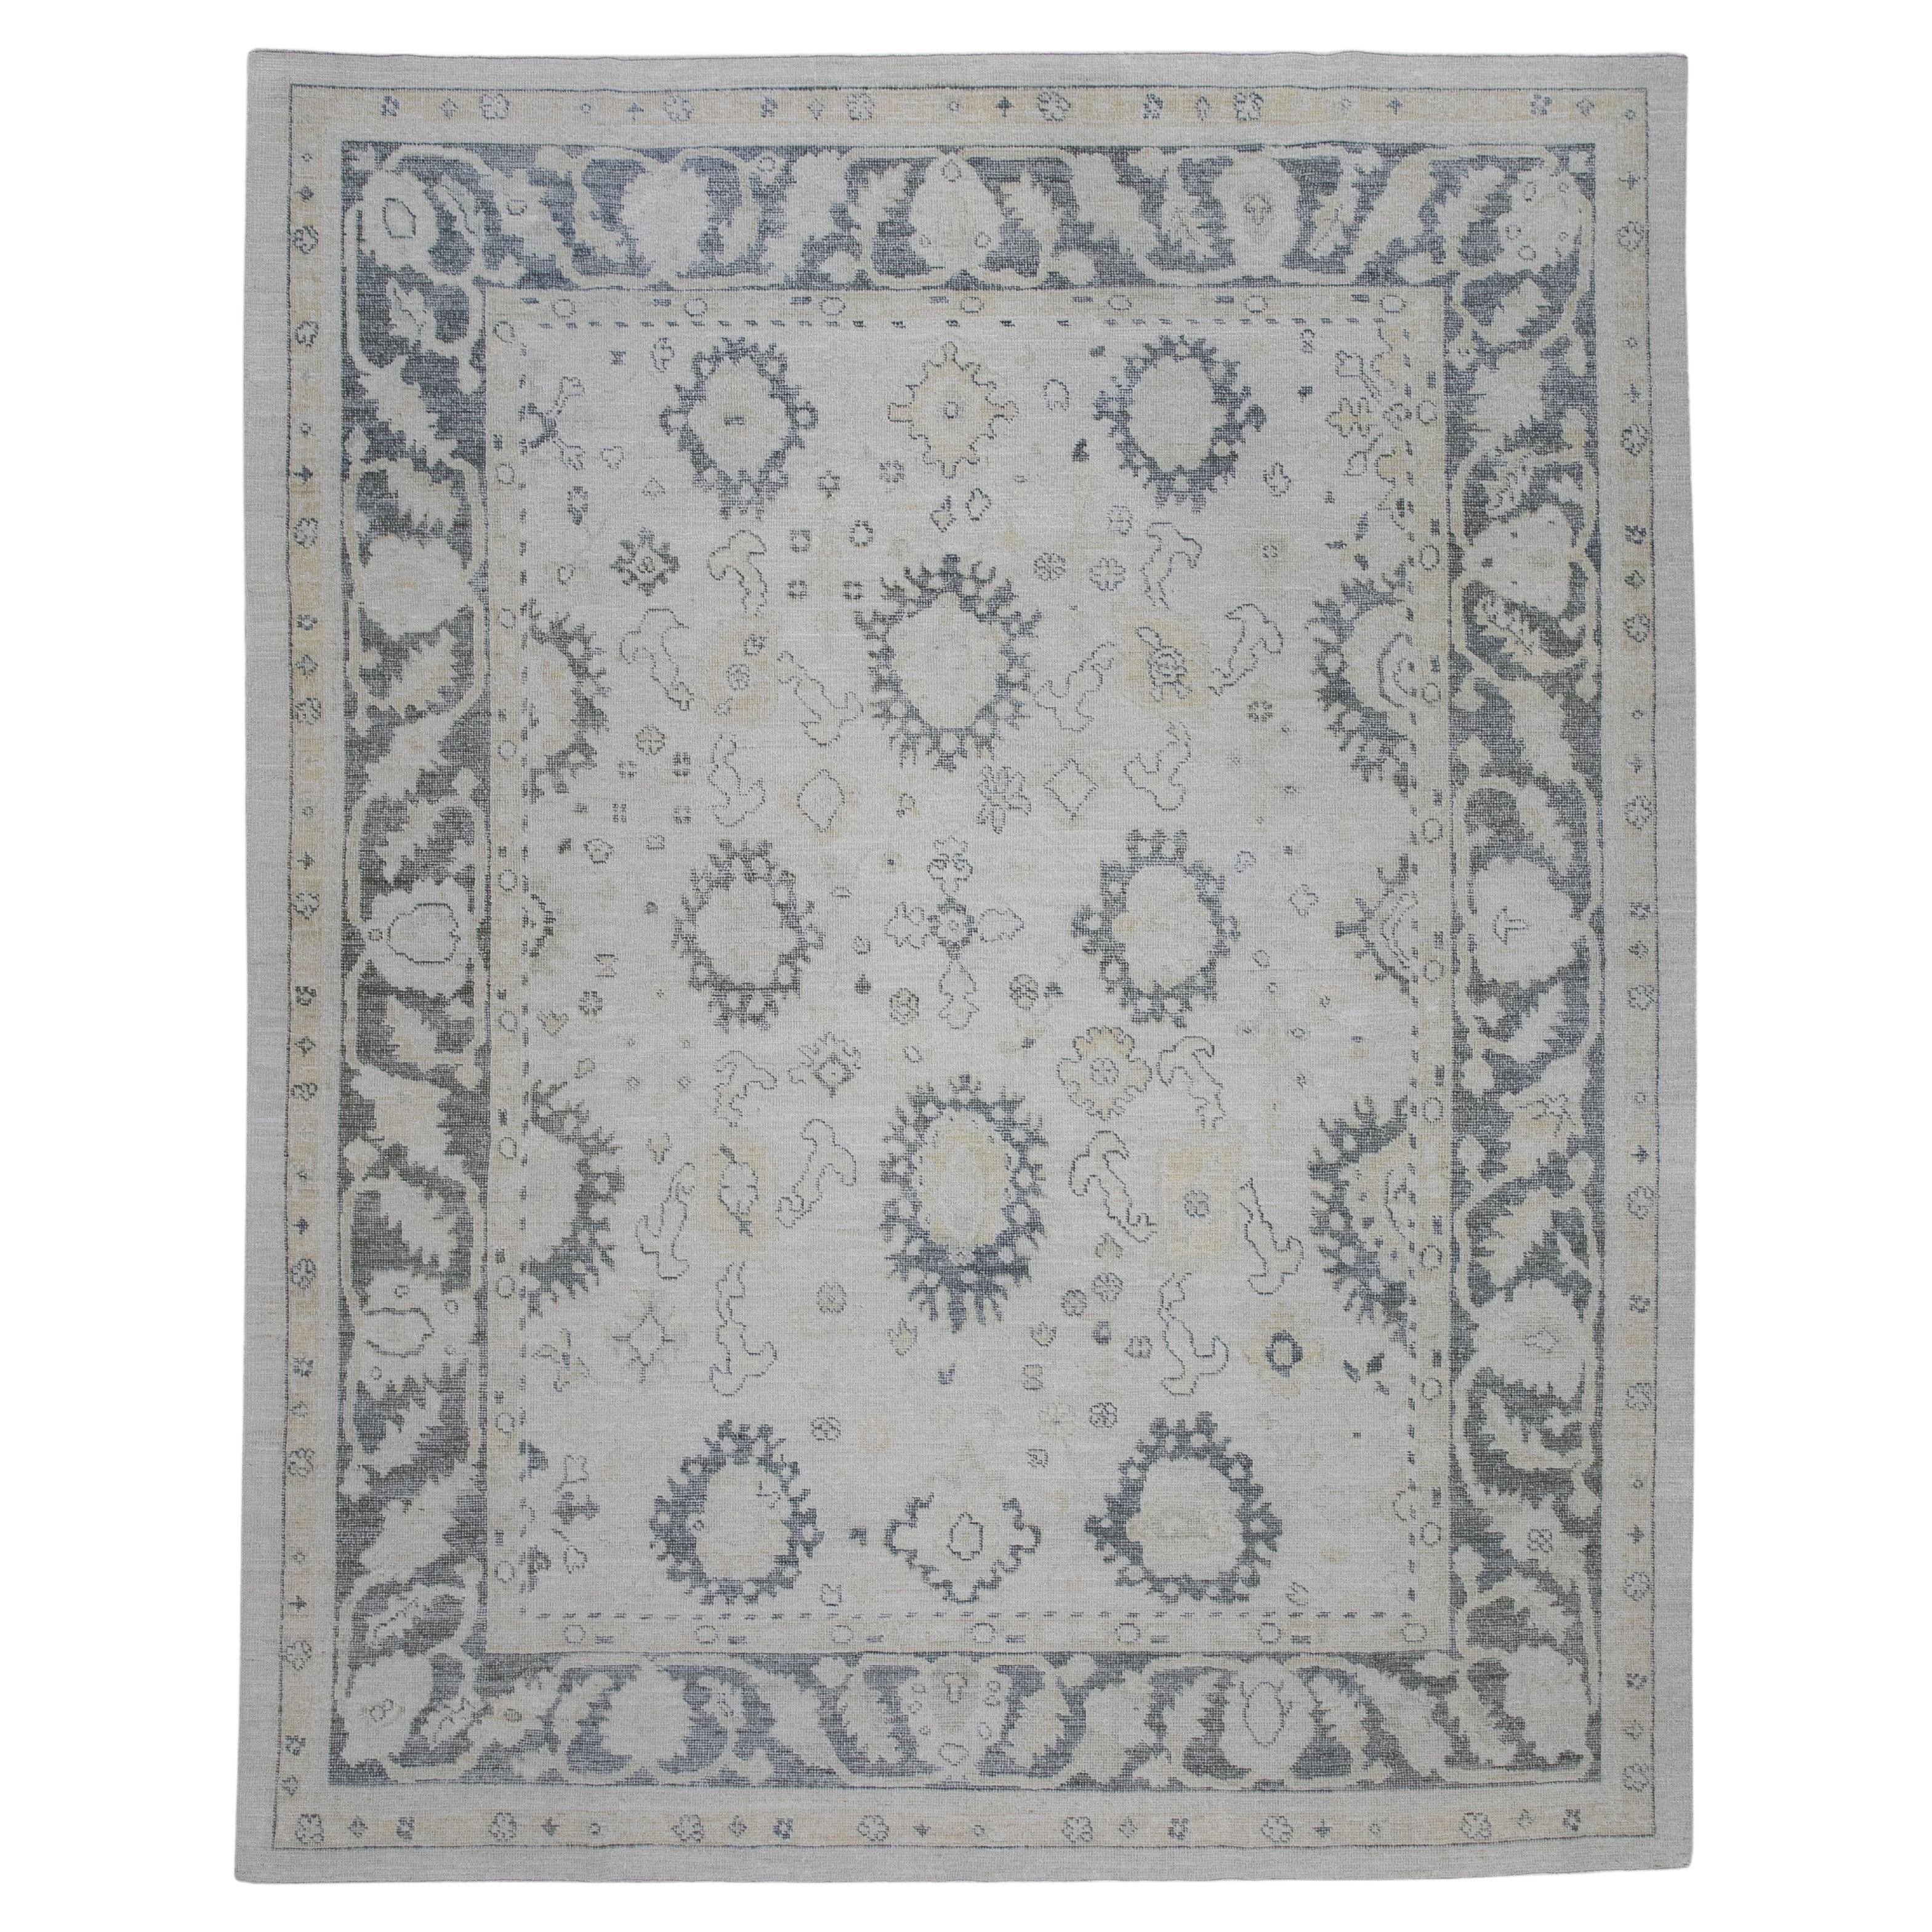 White & Gray Floral Design Handwoven Wool Turkish Oushak Rug 9'4" X 12' For Sale